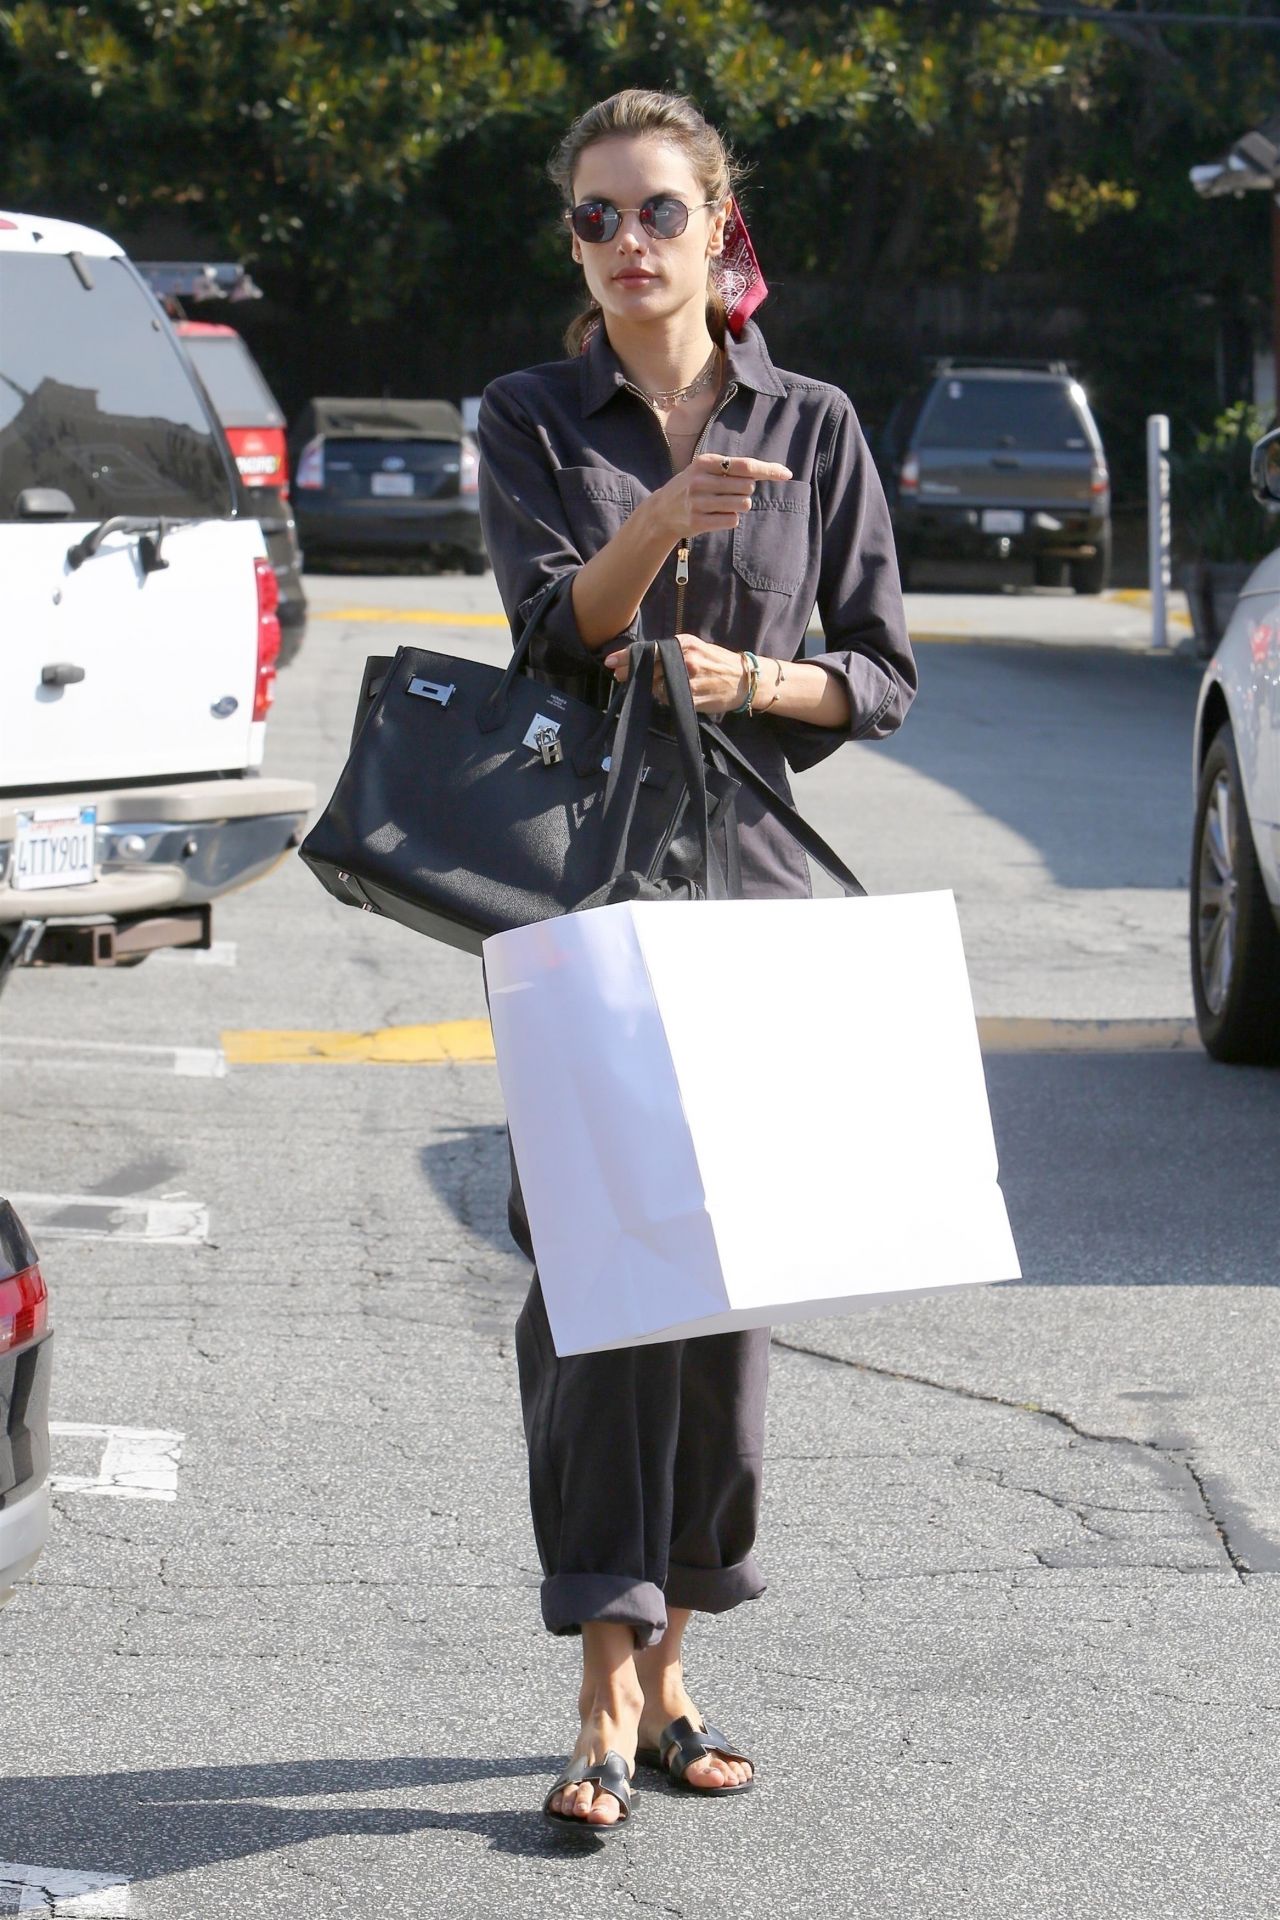 alessandra-ambrosio-and-her-mother-lucilda-ambrosio-shopping-in-brentwood-11-05-2018-10.jpg